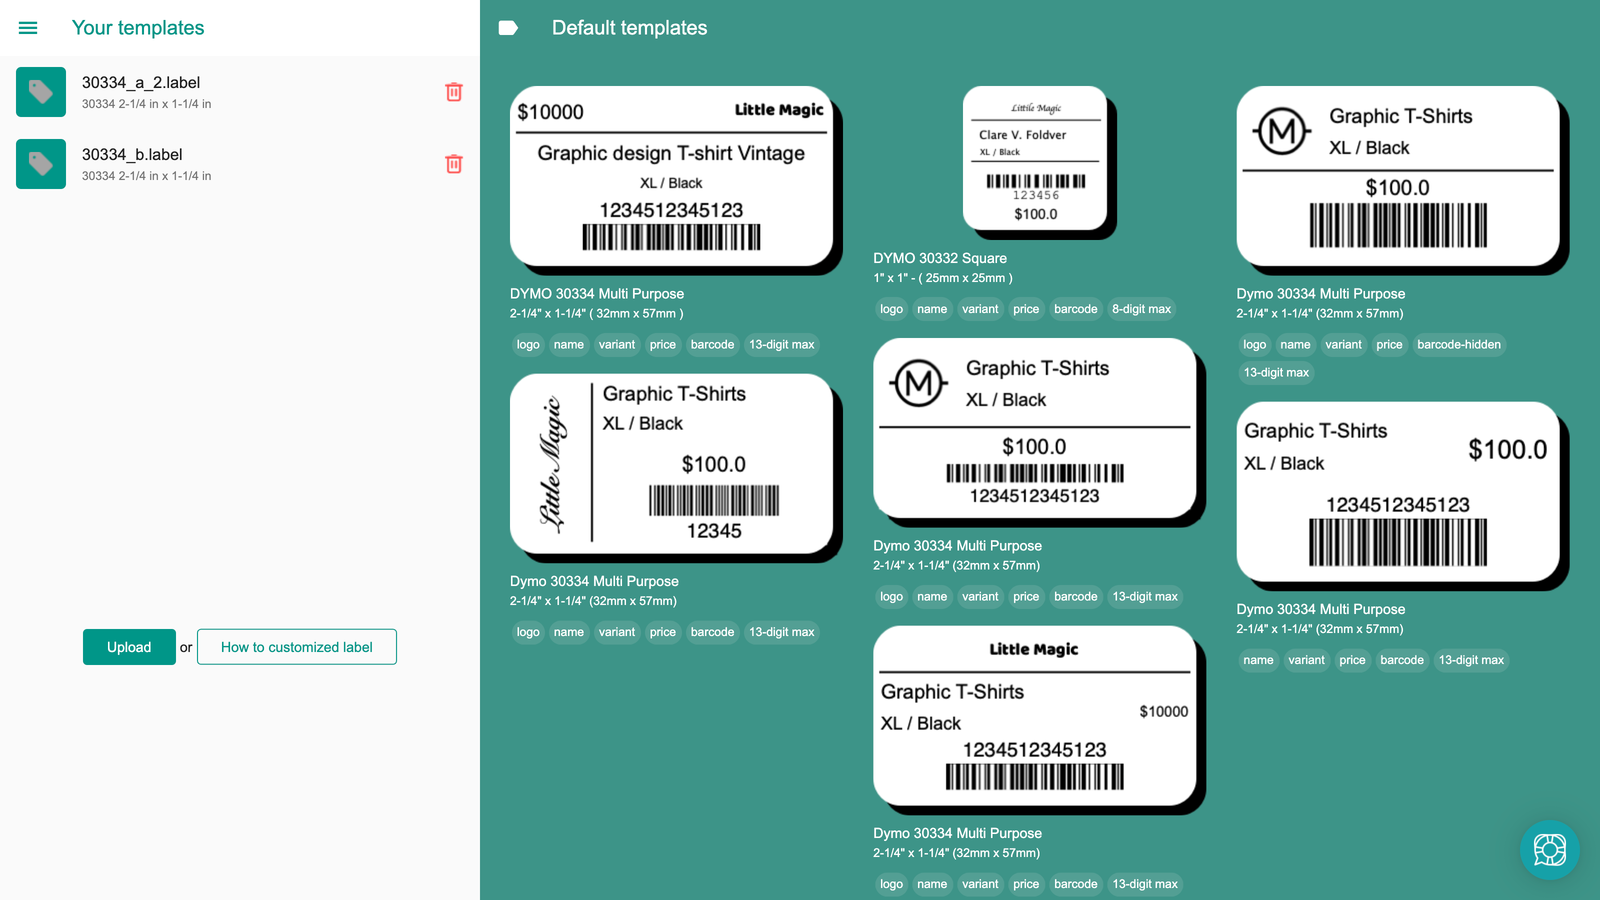 Customize own labels through DYMO 